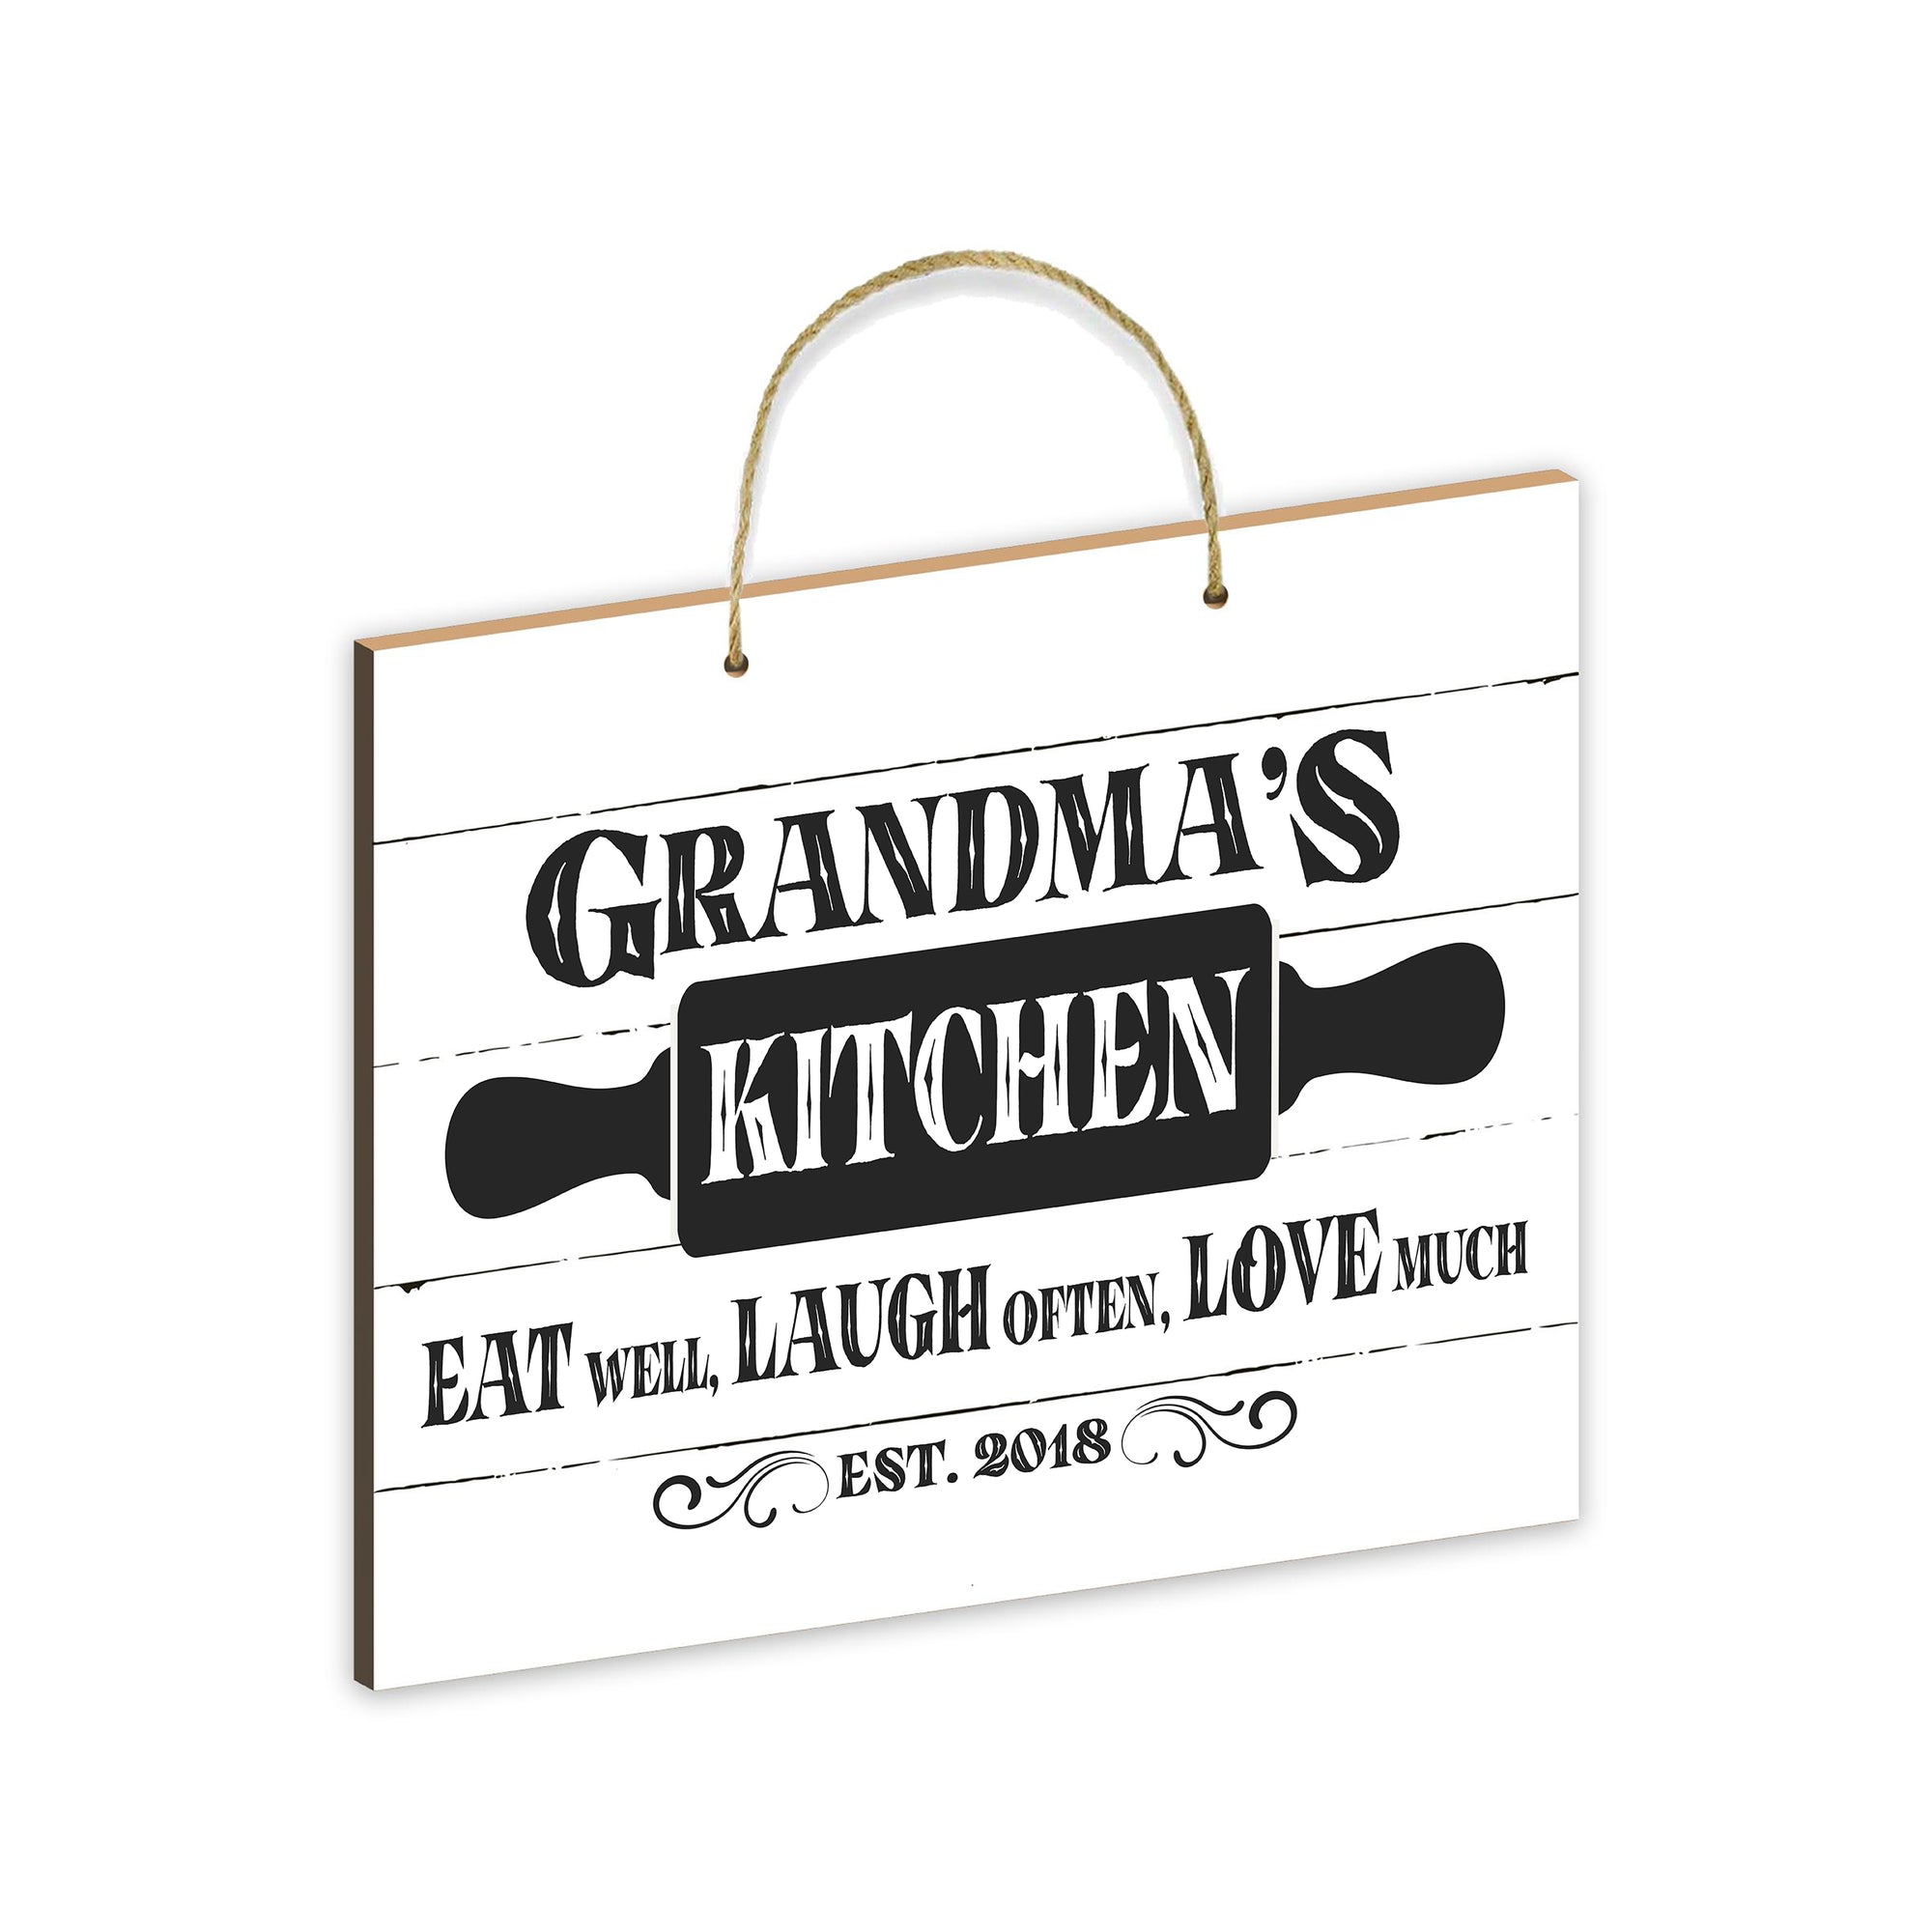 Rustic-Inspired Wooden Wall Hanging Rope Sign For Kitchen & Home Décor - Eat Well, Laugh Often, Love Much